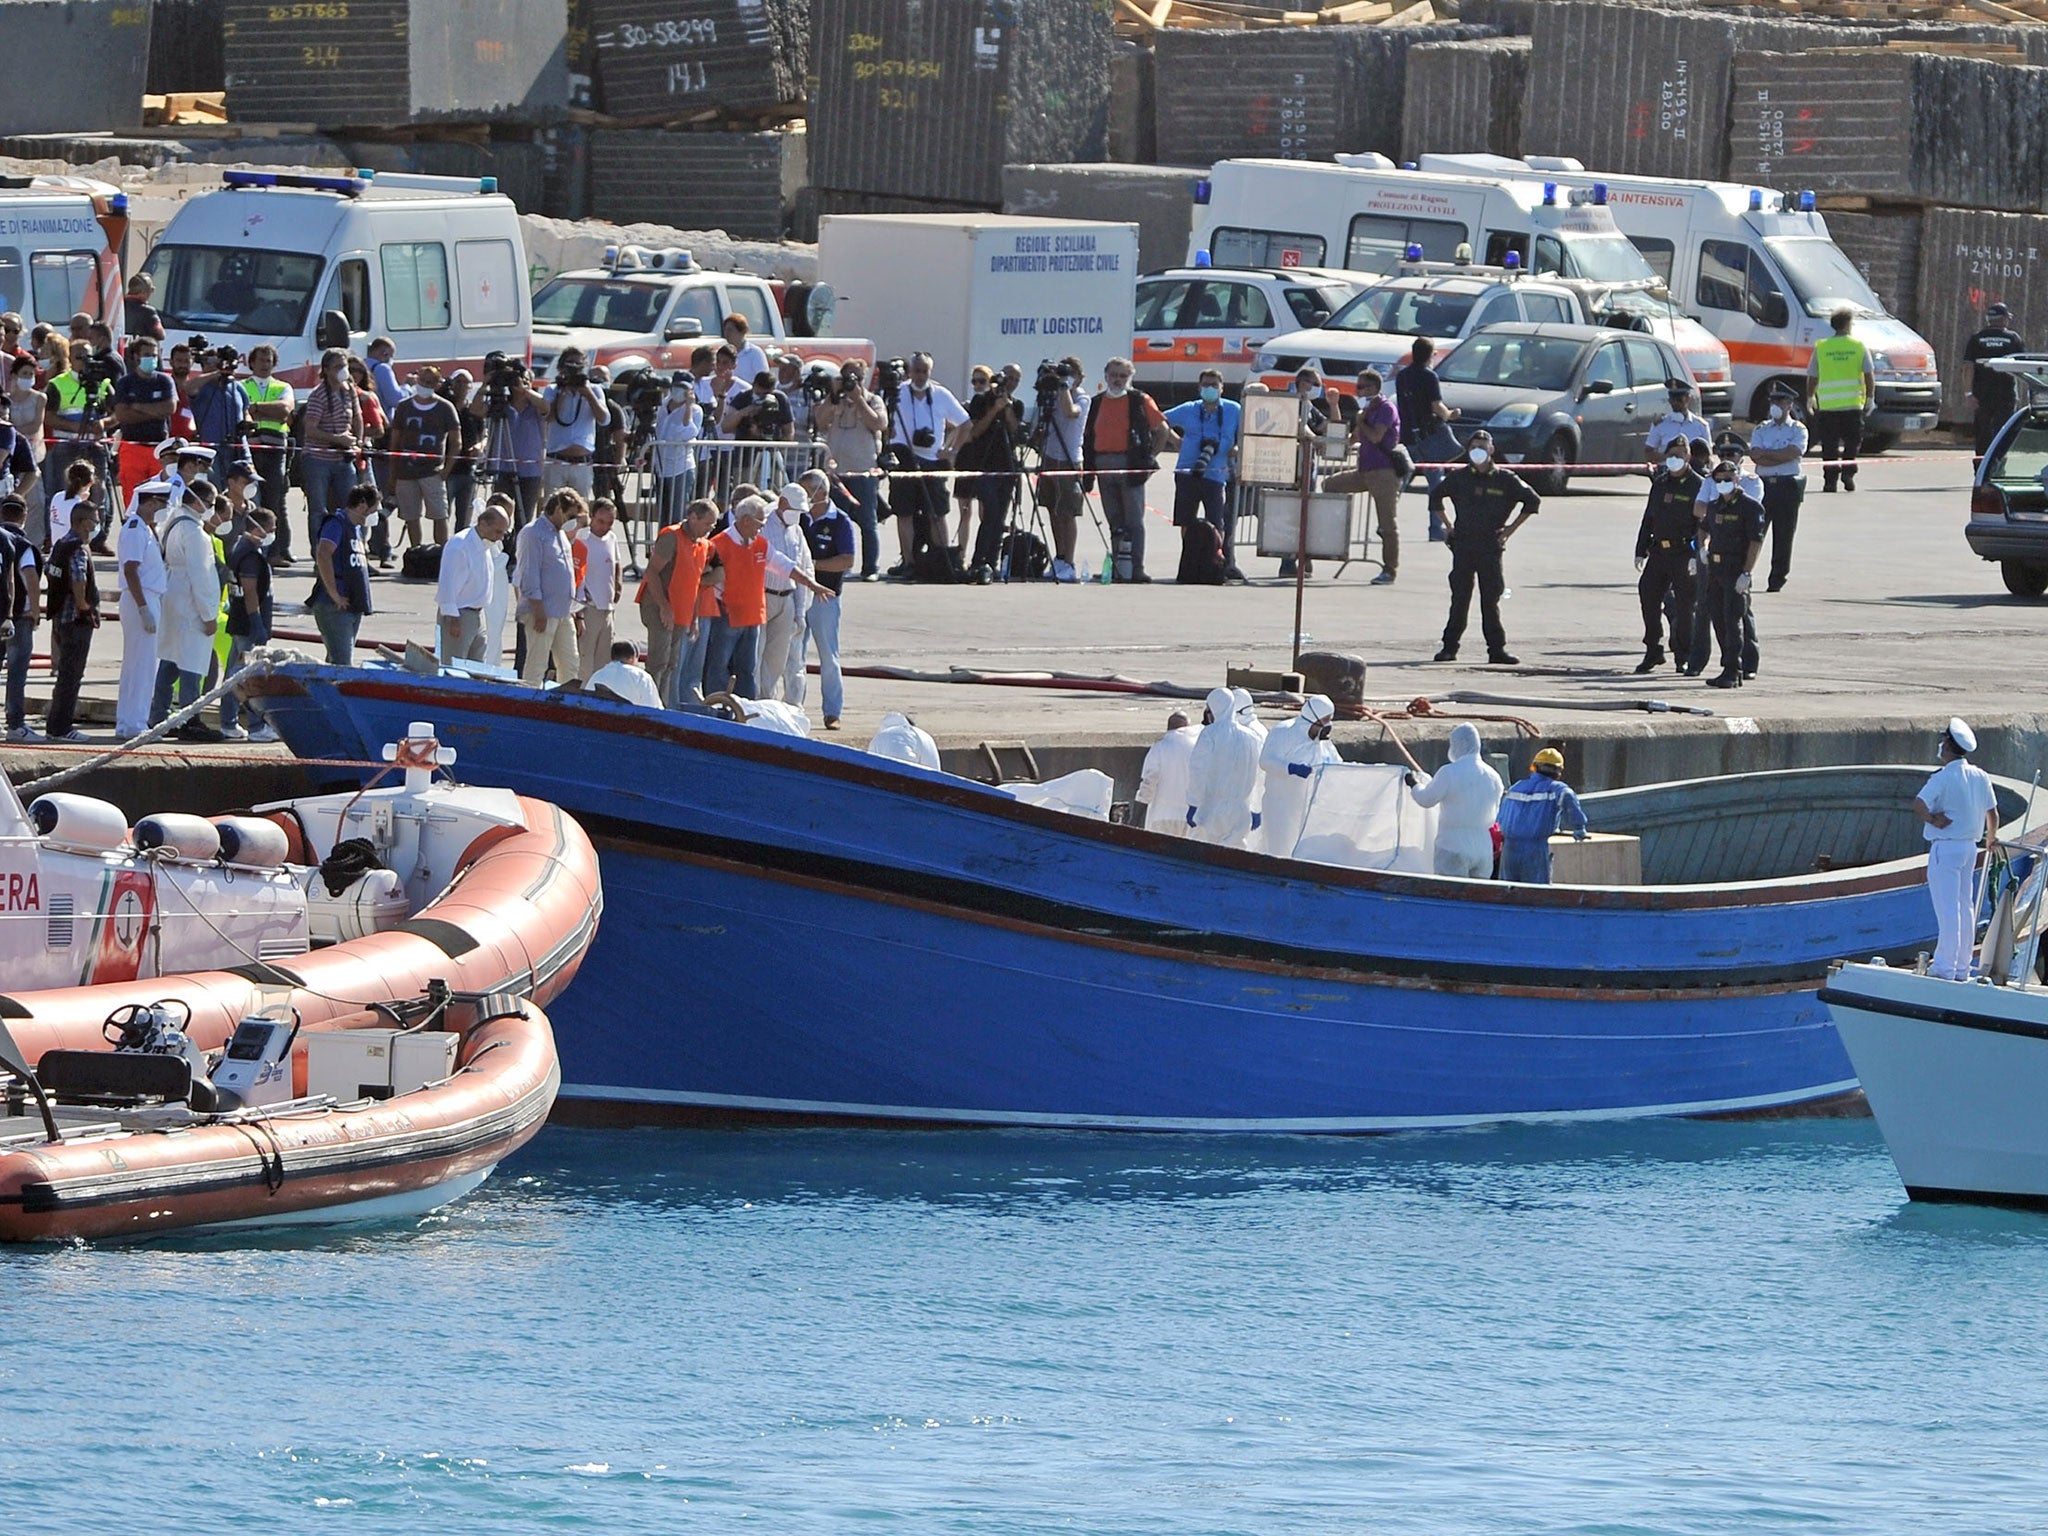 Firemen and policemen evacuate the dead bodies of migrants from a boat on July 1st, 2014 in the port of Pozzallo, Sicily, two days after a rescue operation off the coast. Rescuers found 45 victims stuffed into the hold of a fishing boat from north Africa